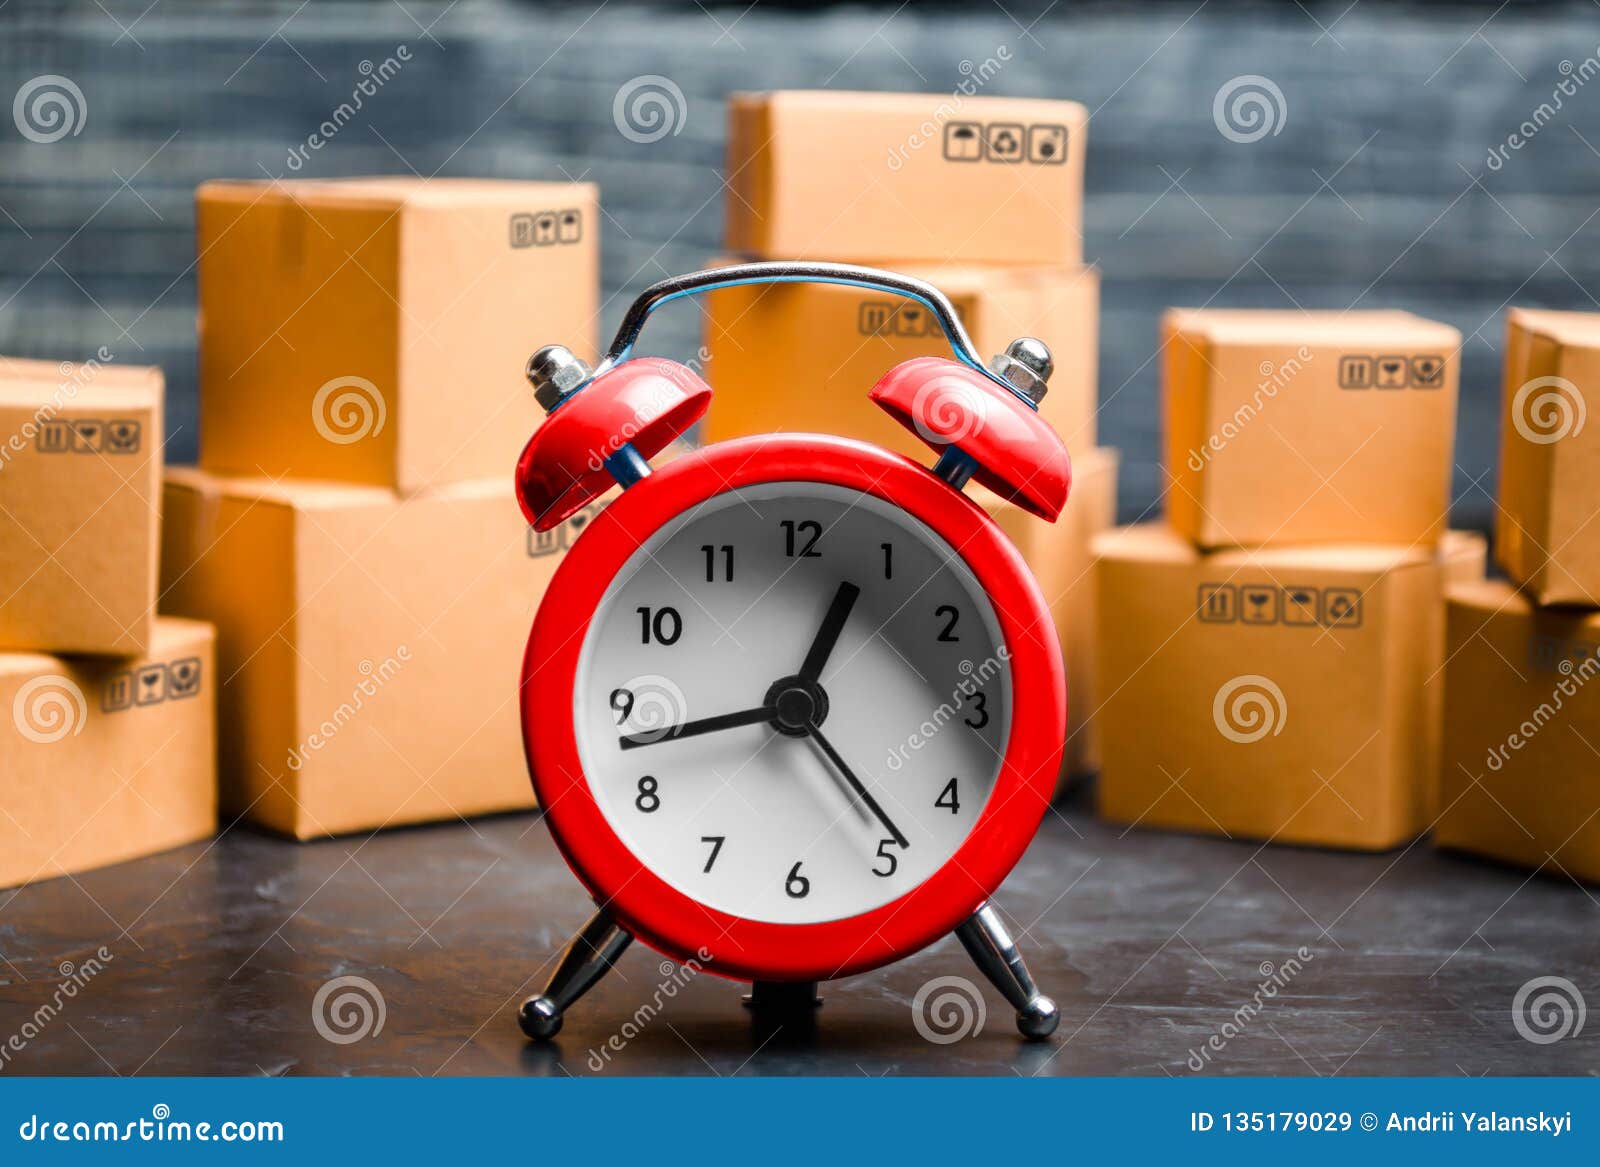 cardboard boxes and red alarm clock. time of delivery. limited supply, shortage of goods in stock, hype and consumer fever. time